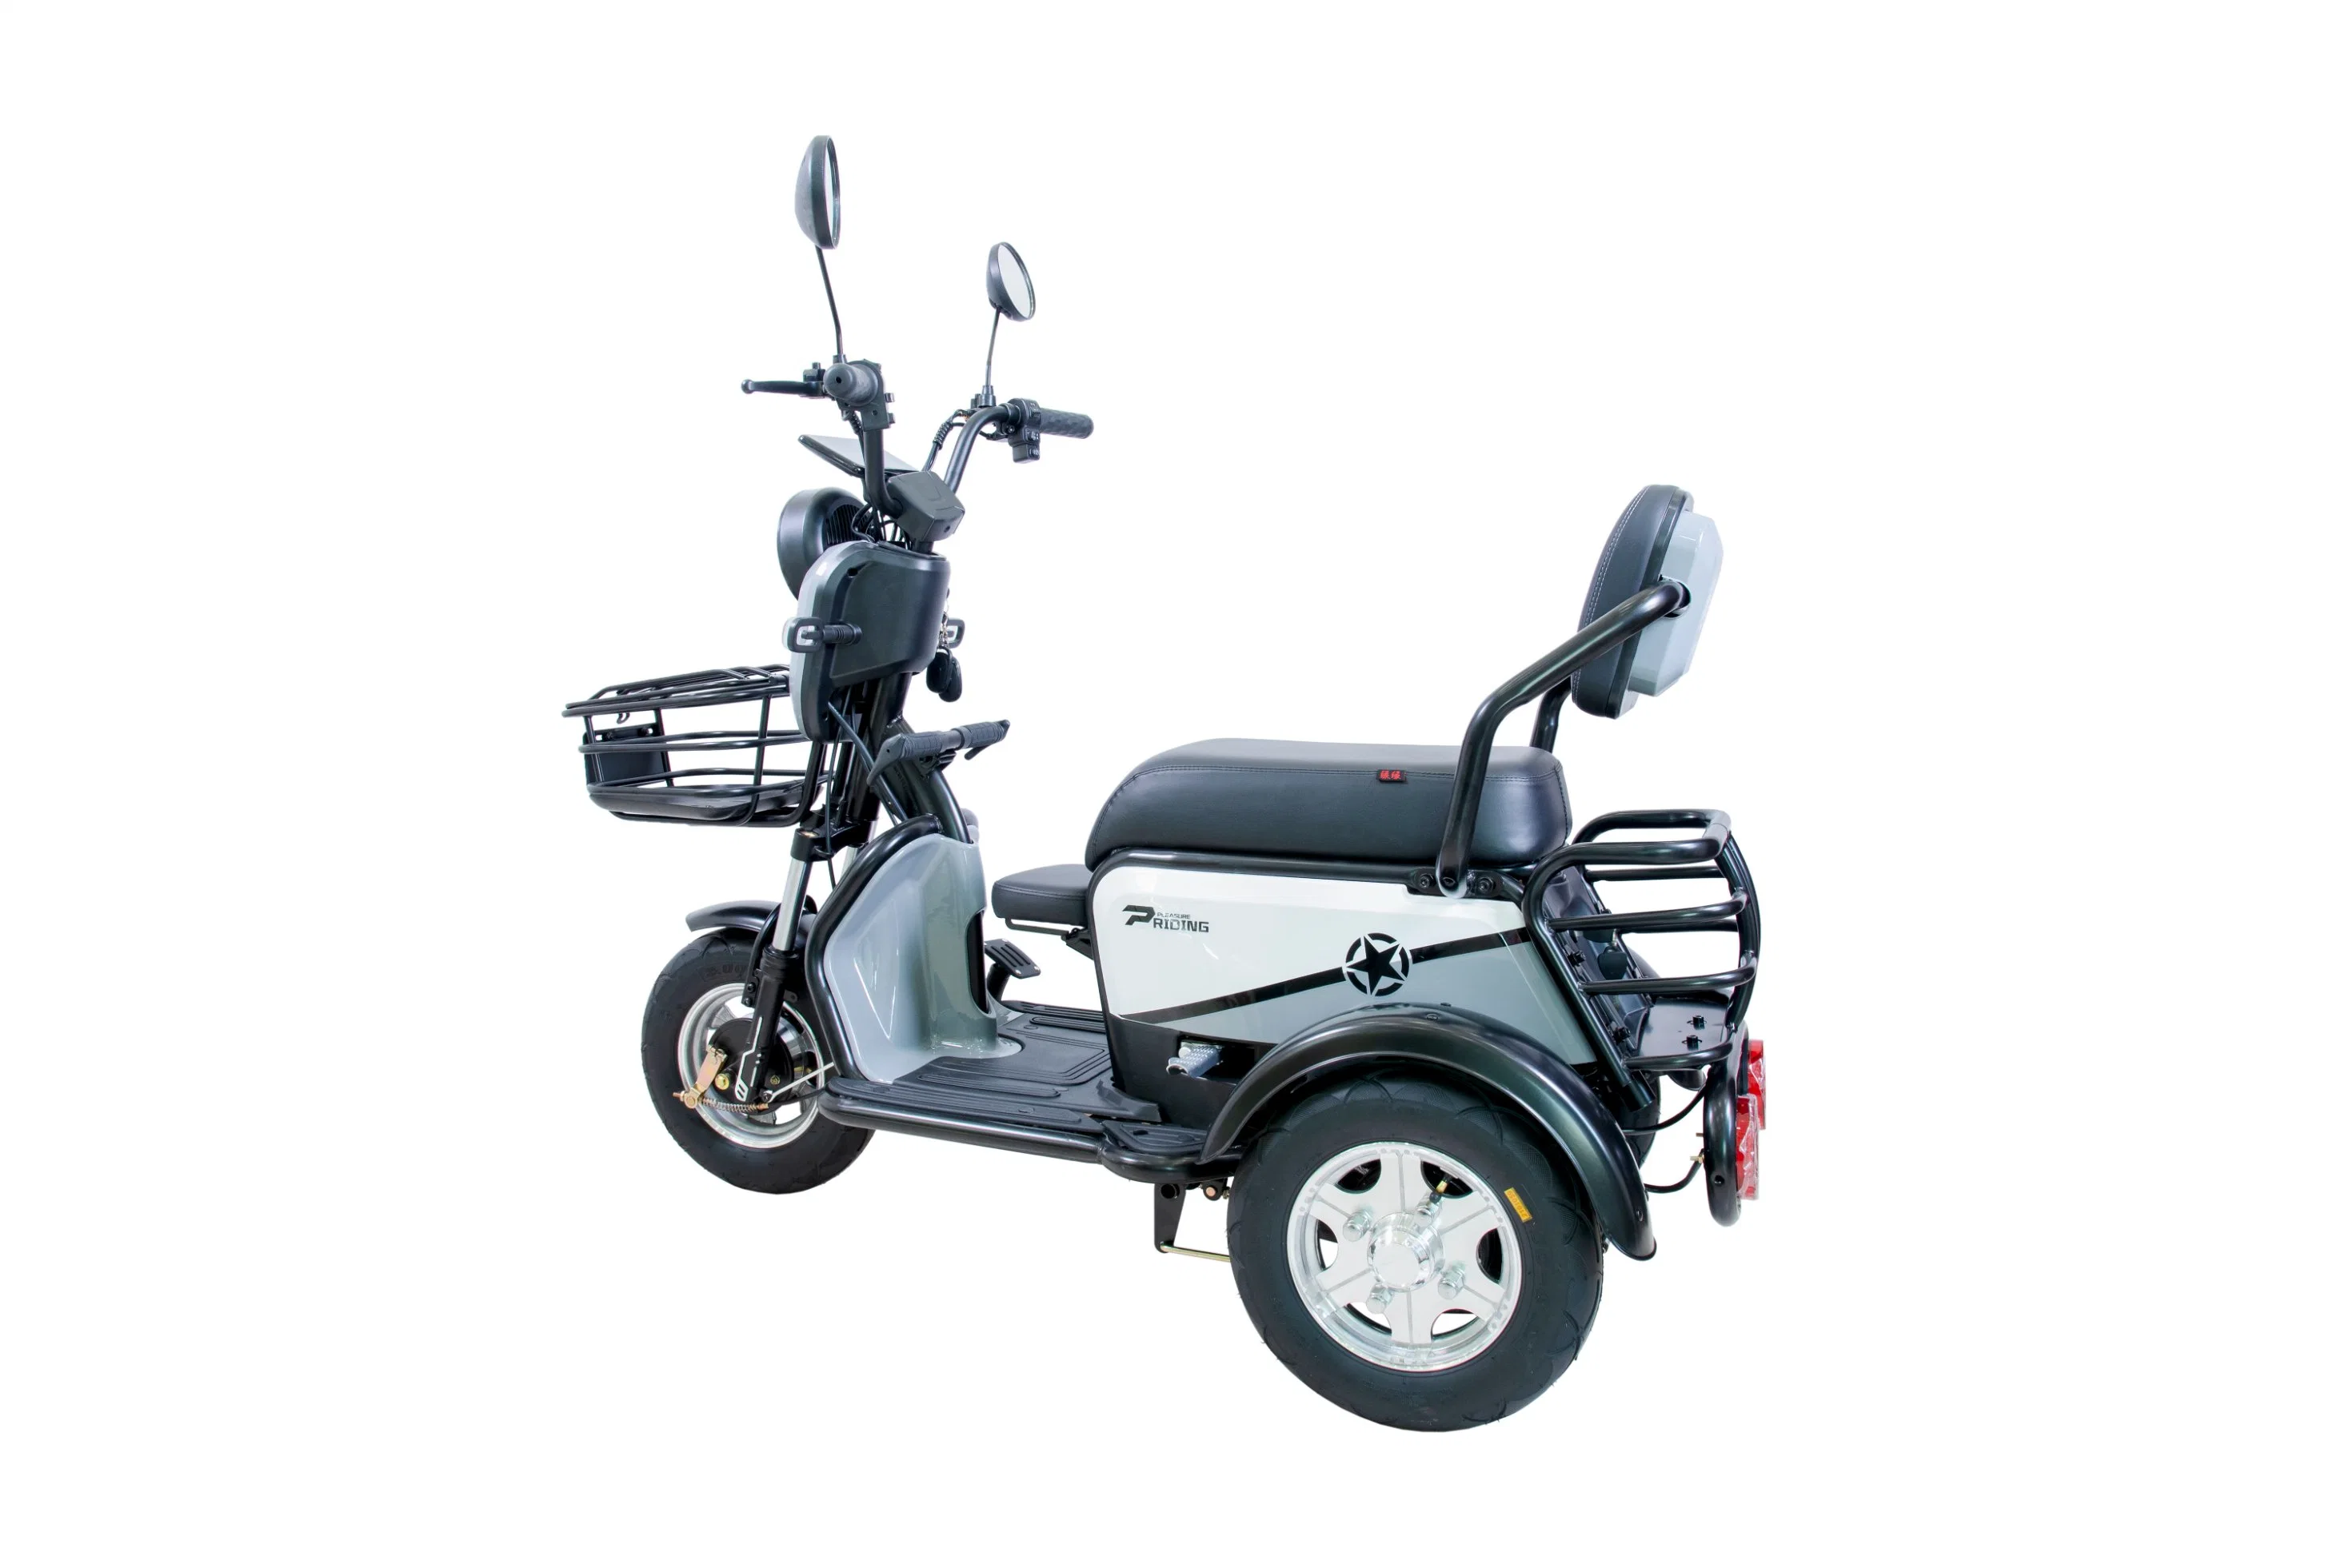 Adult Bike Electric Tricycle Scooter with 500W Motor 48V/60V/72V20ah Battery